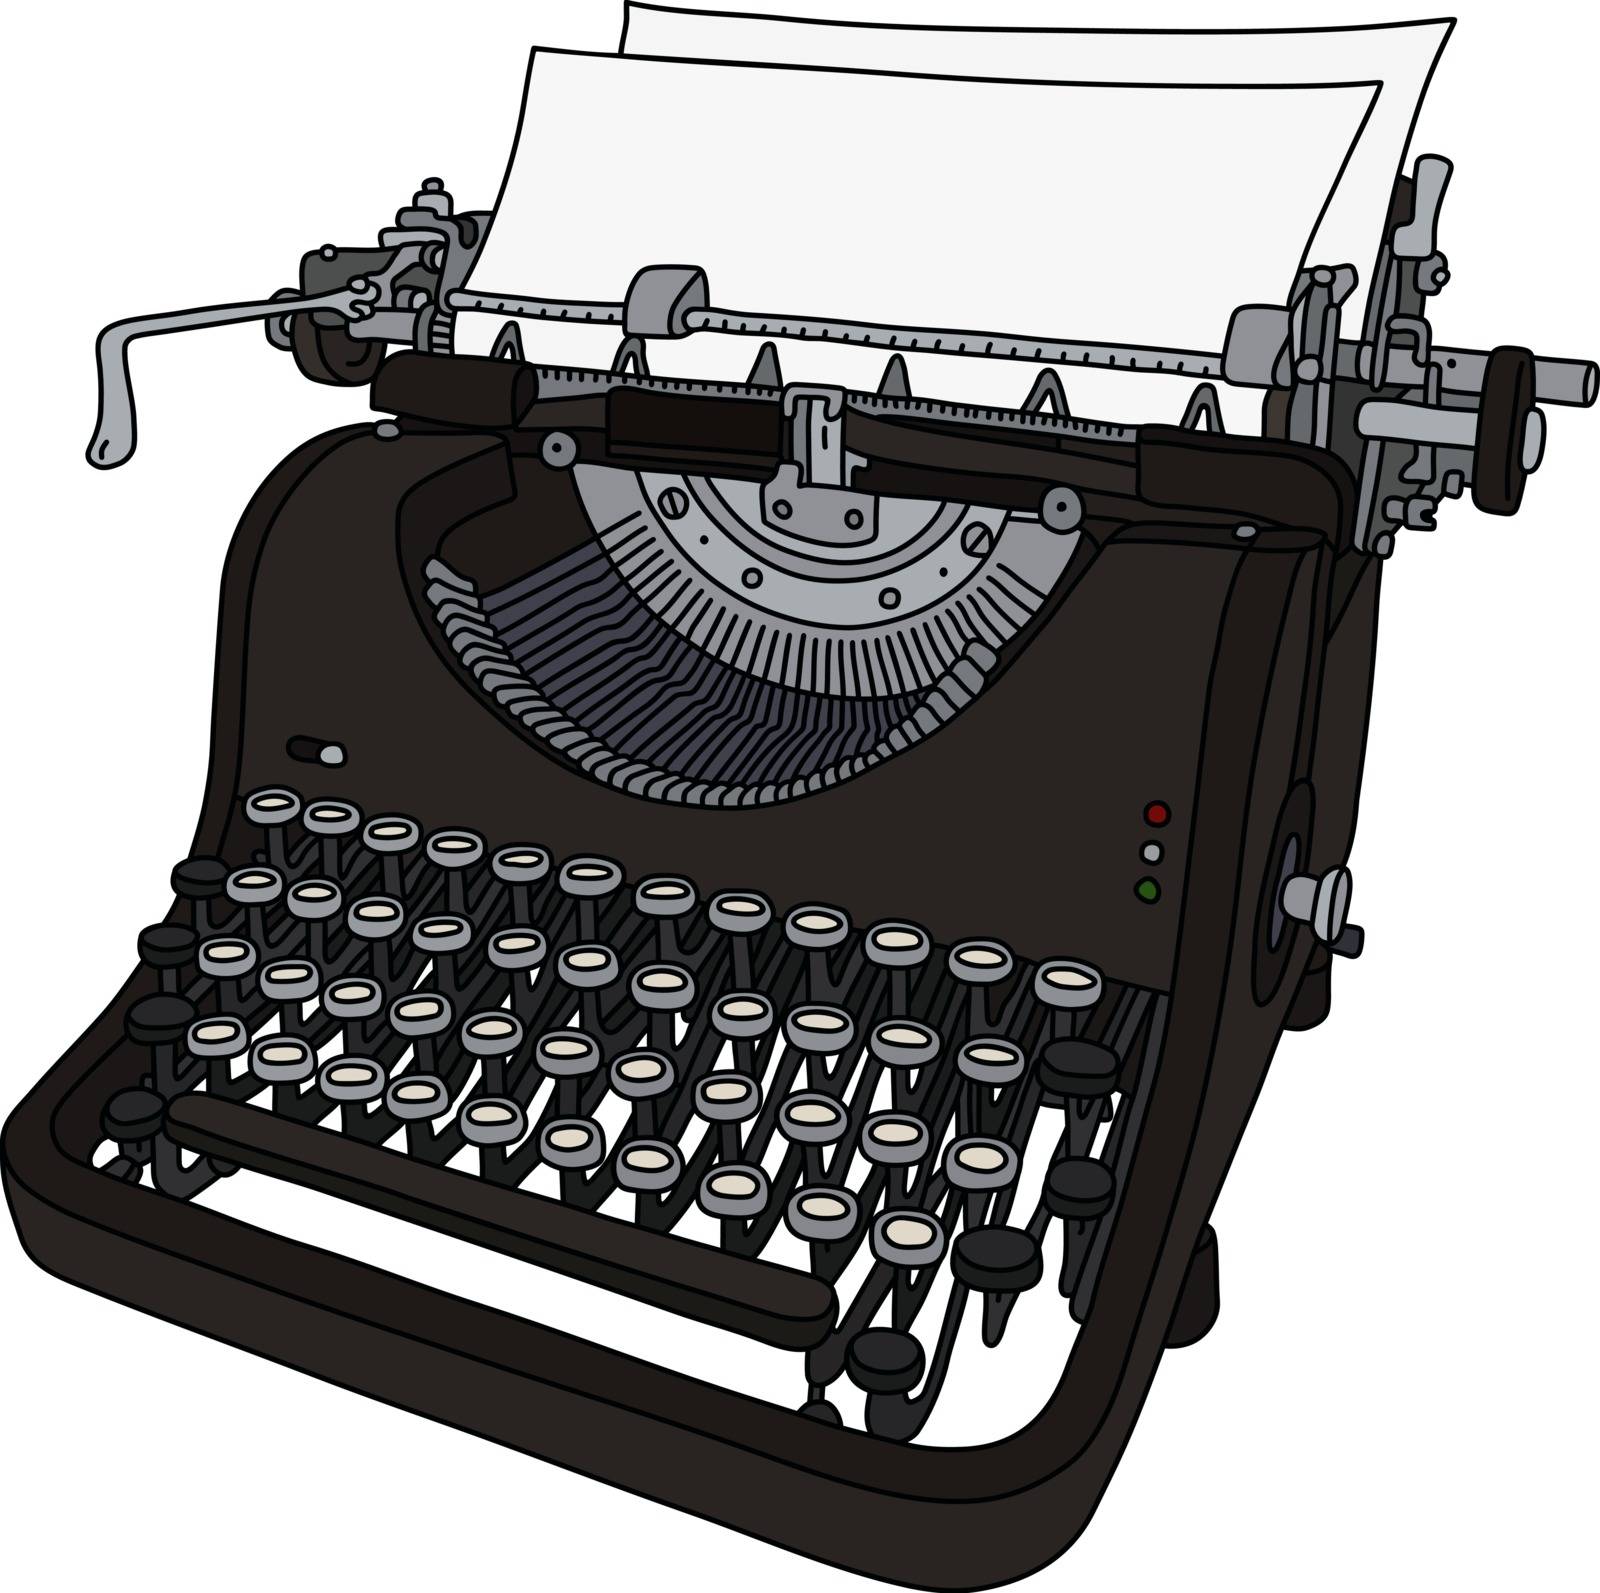 The vectorized hand drawing of a vintage typewriter